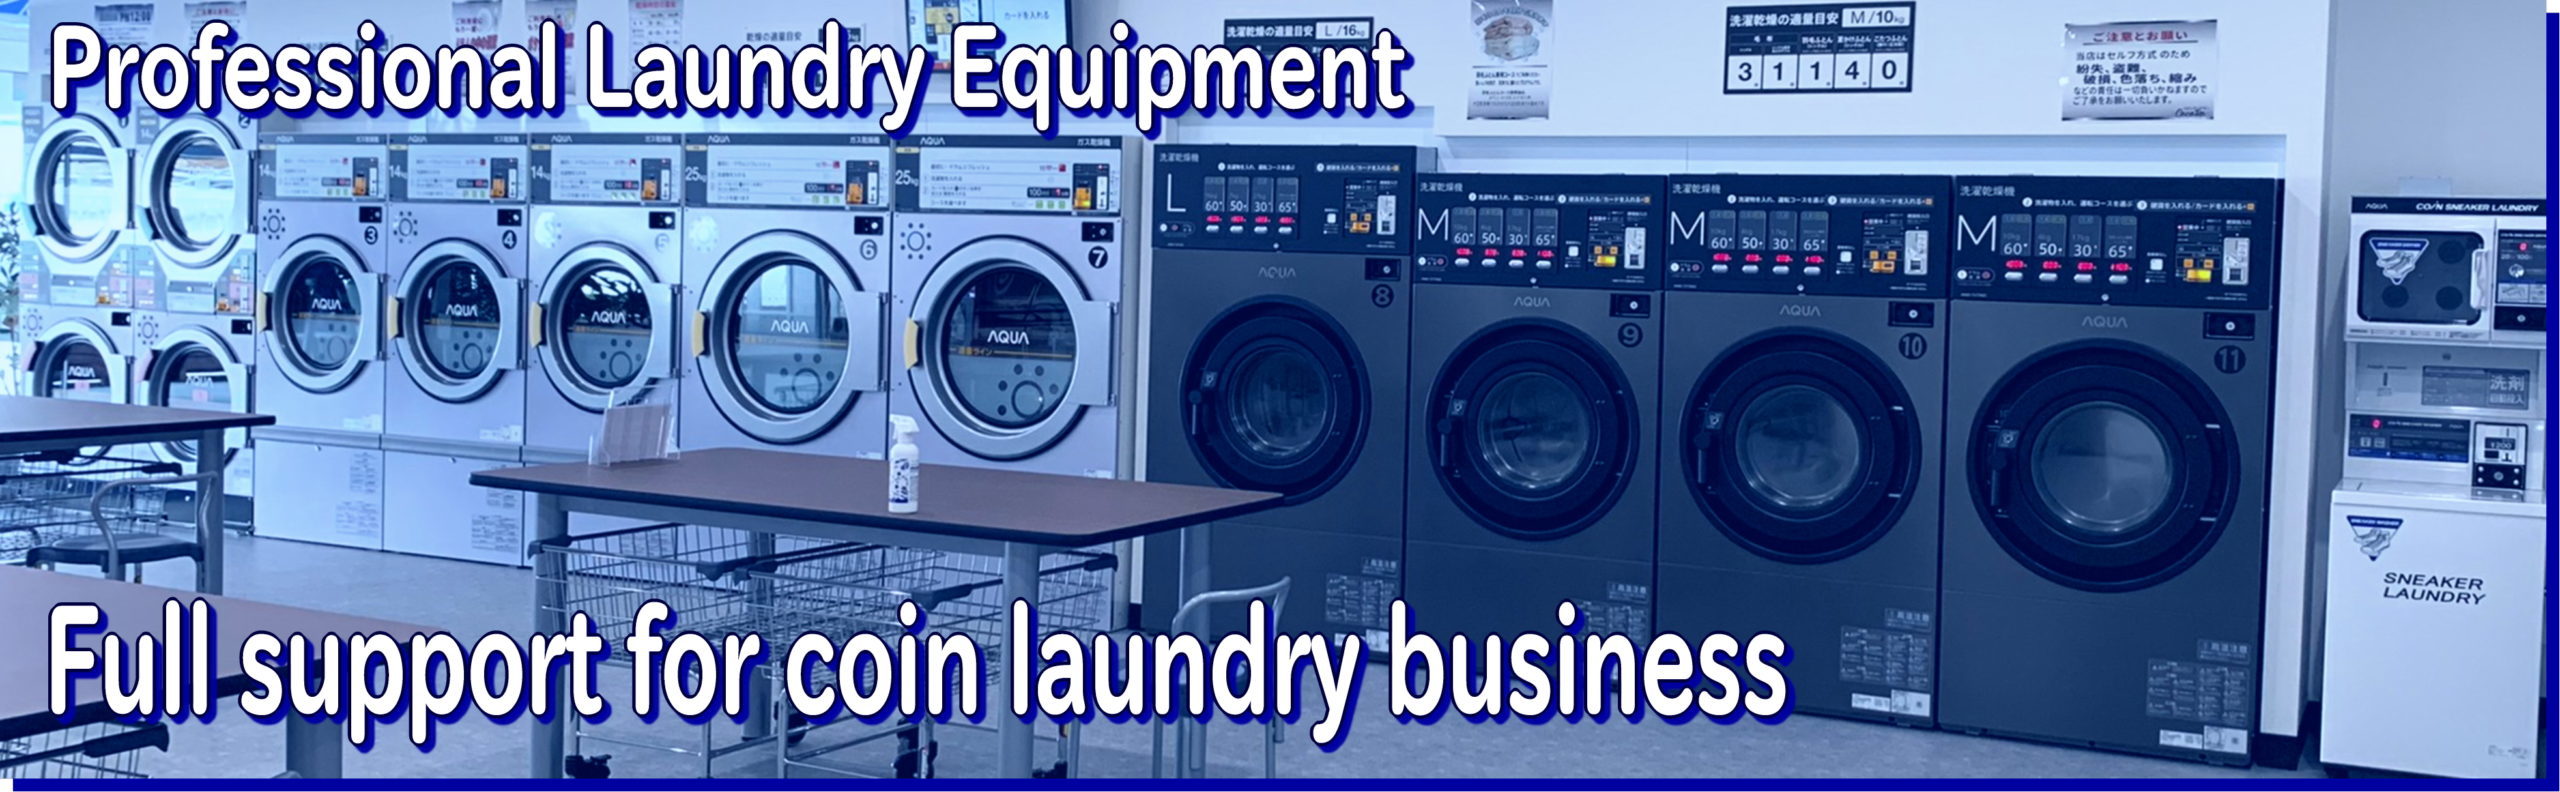 Full support for Coin laundry business